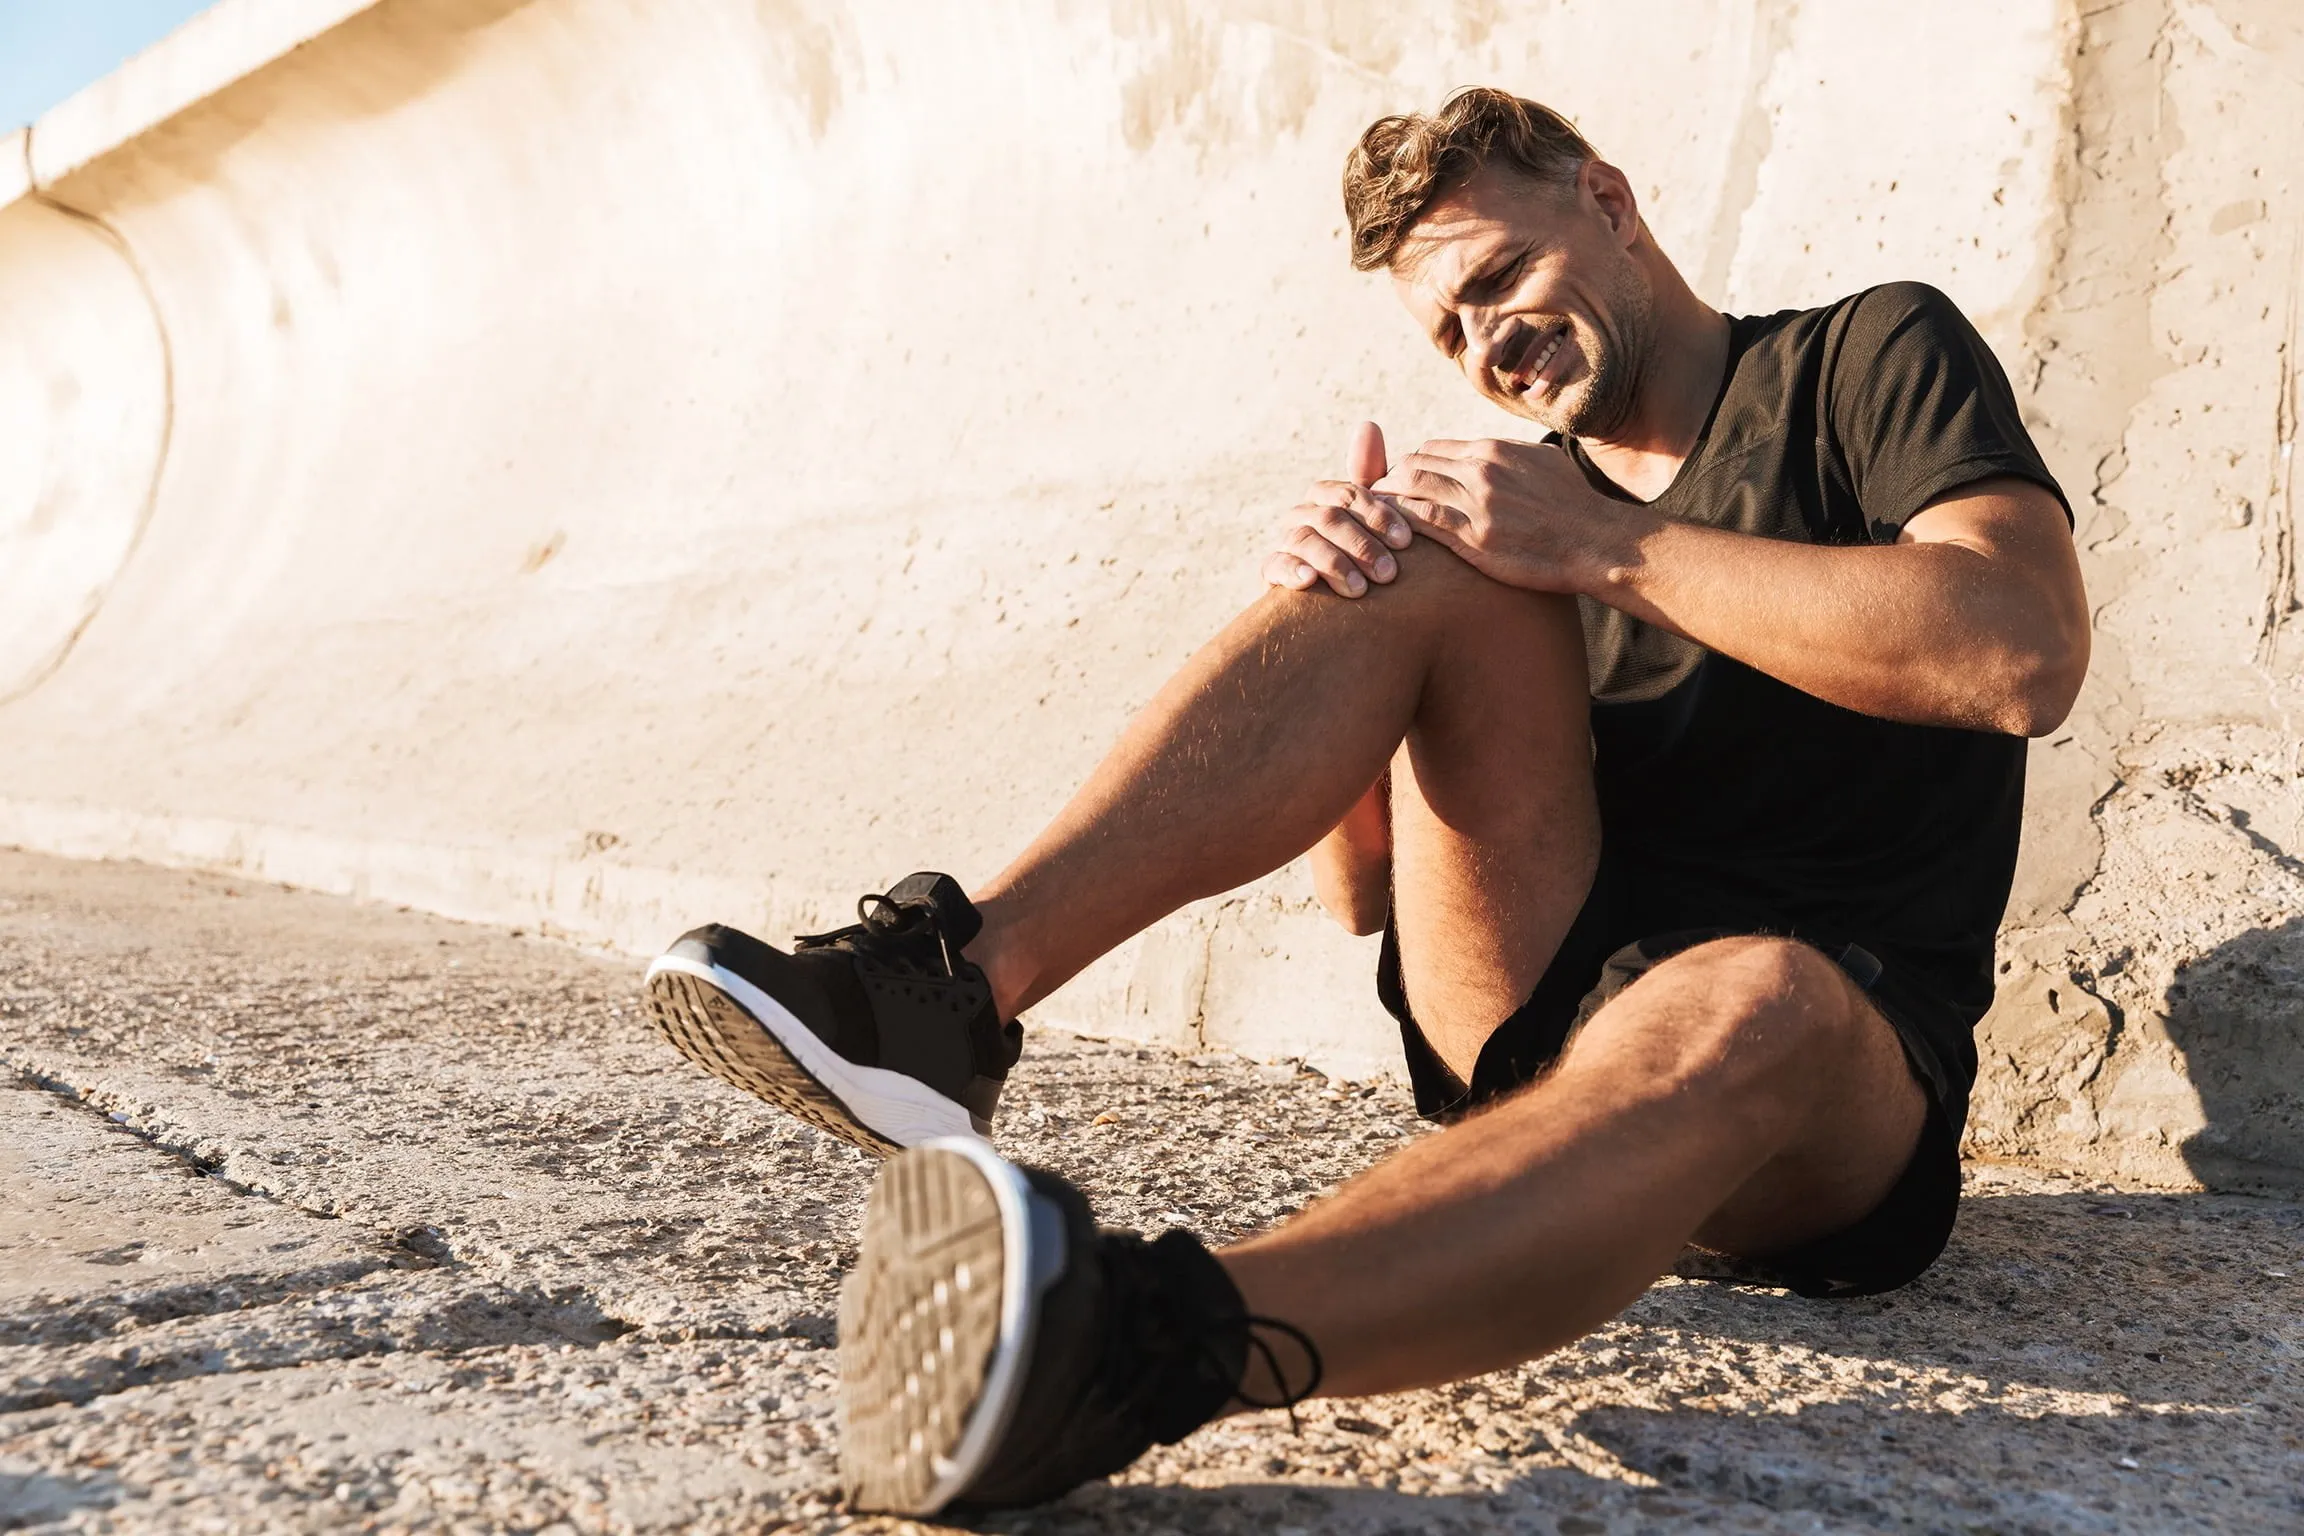 Male runner sitting on the ground holding knee in pain. If you’ve sustained an injury due to others’ negligence, our Idaho Falls personal injury attorneys can help you.